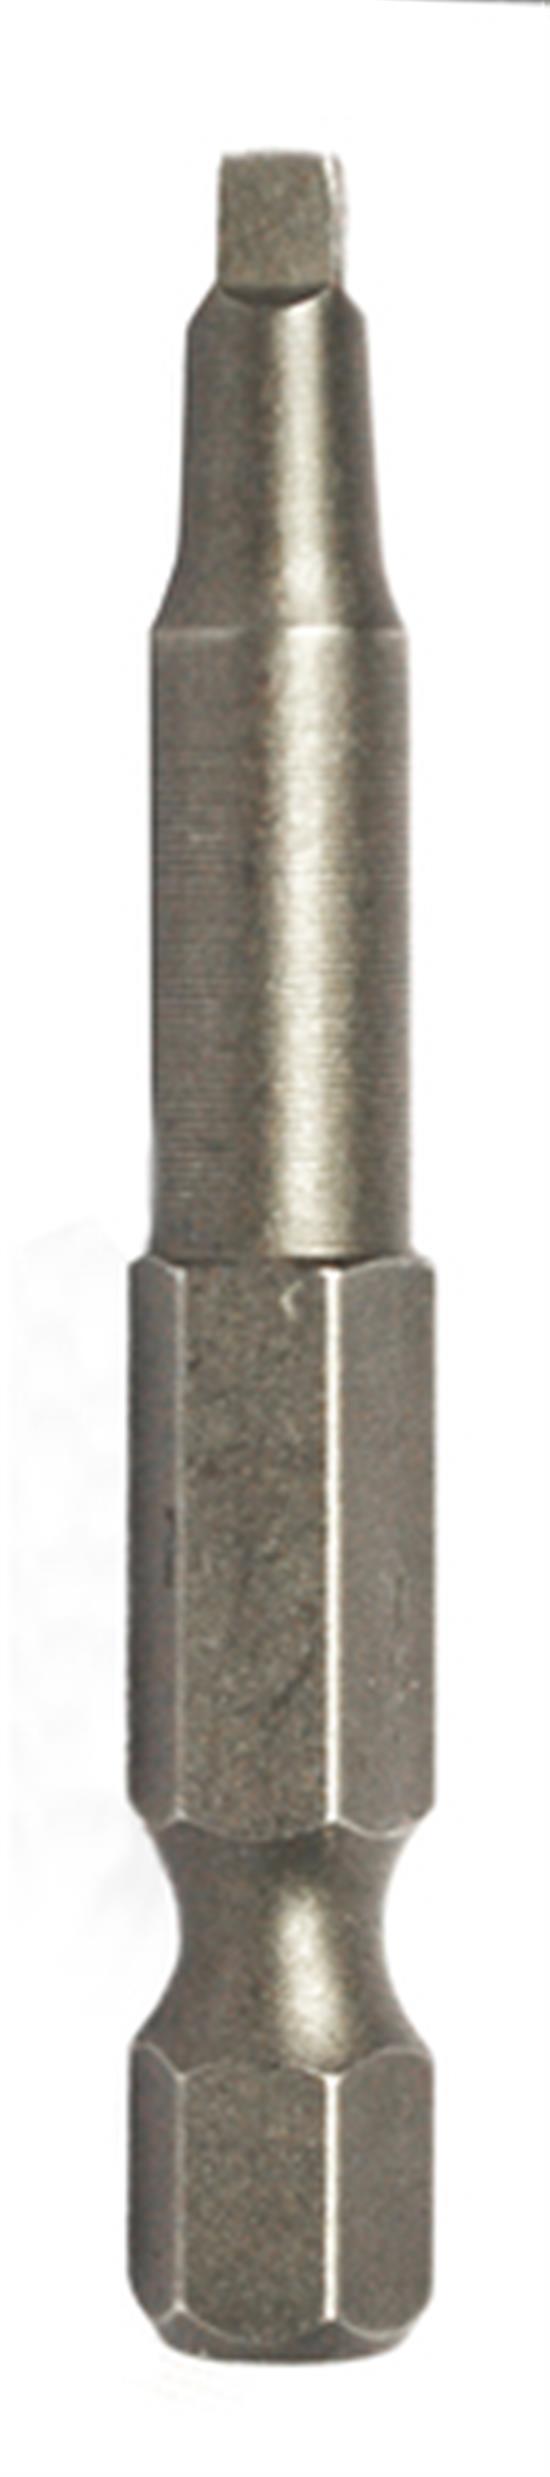 Picture of PRED R2X1-15/16" SQRE PWR BIT